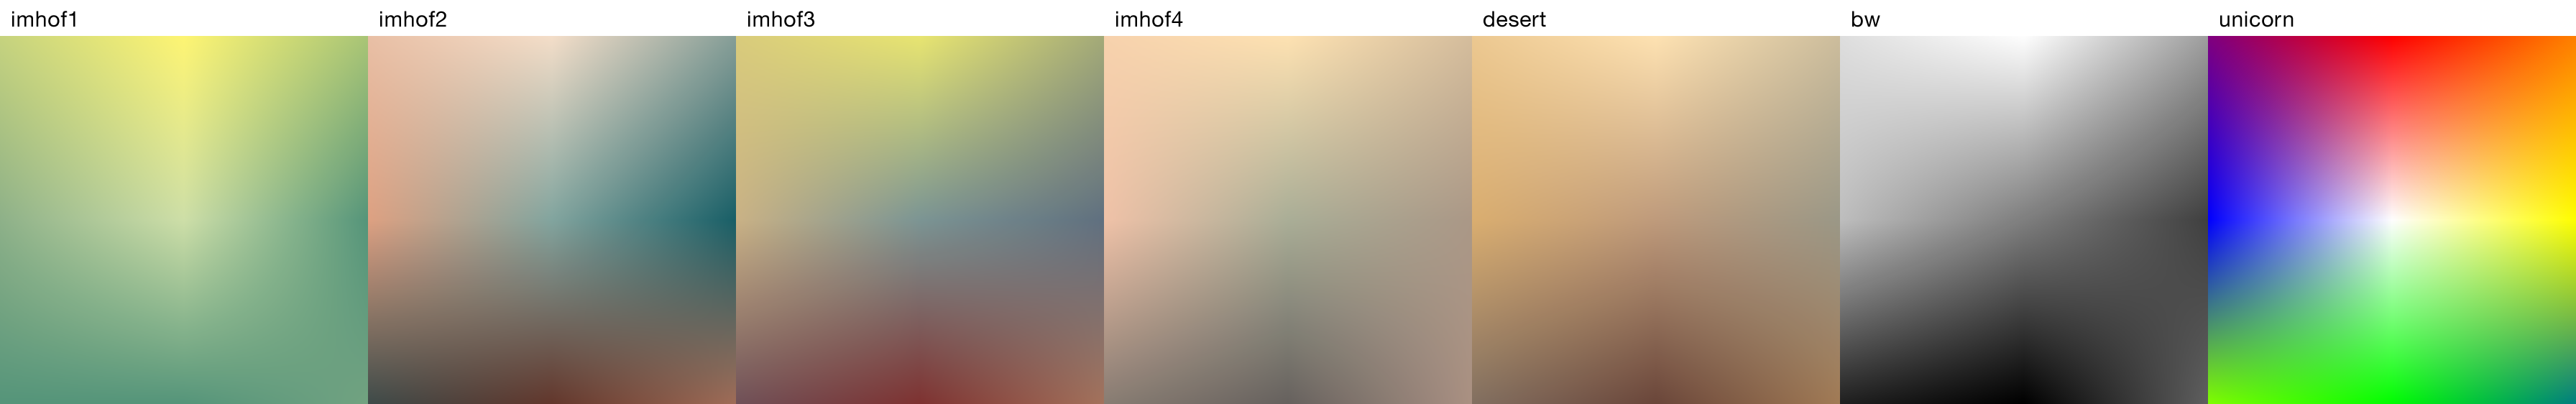 Figure 3: The various built-in textures in sphere_shade()